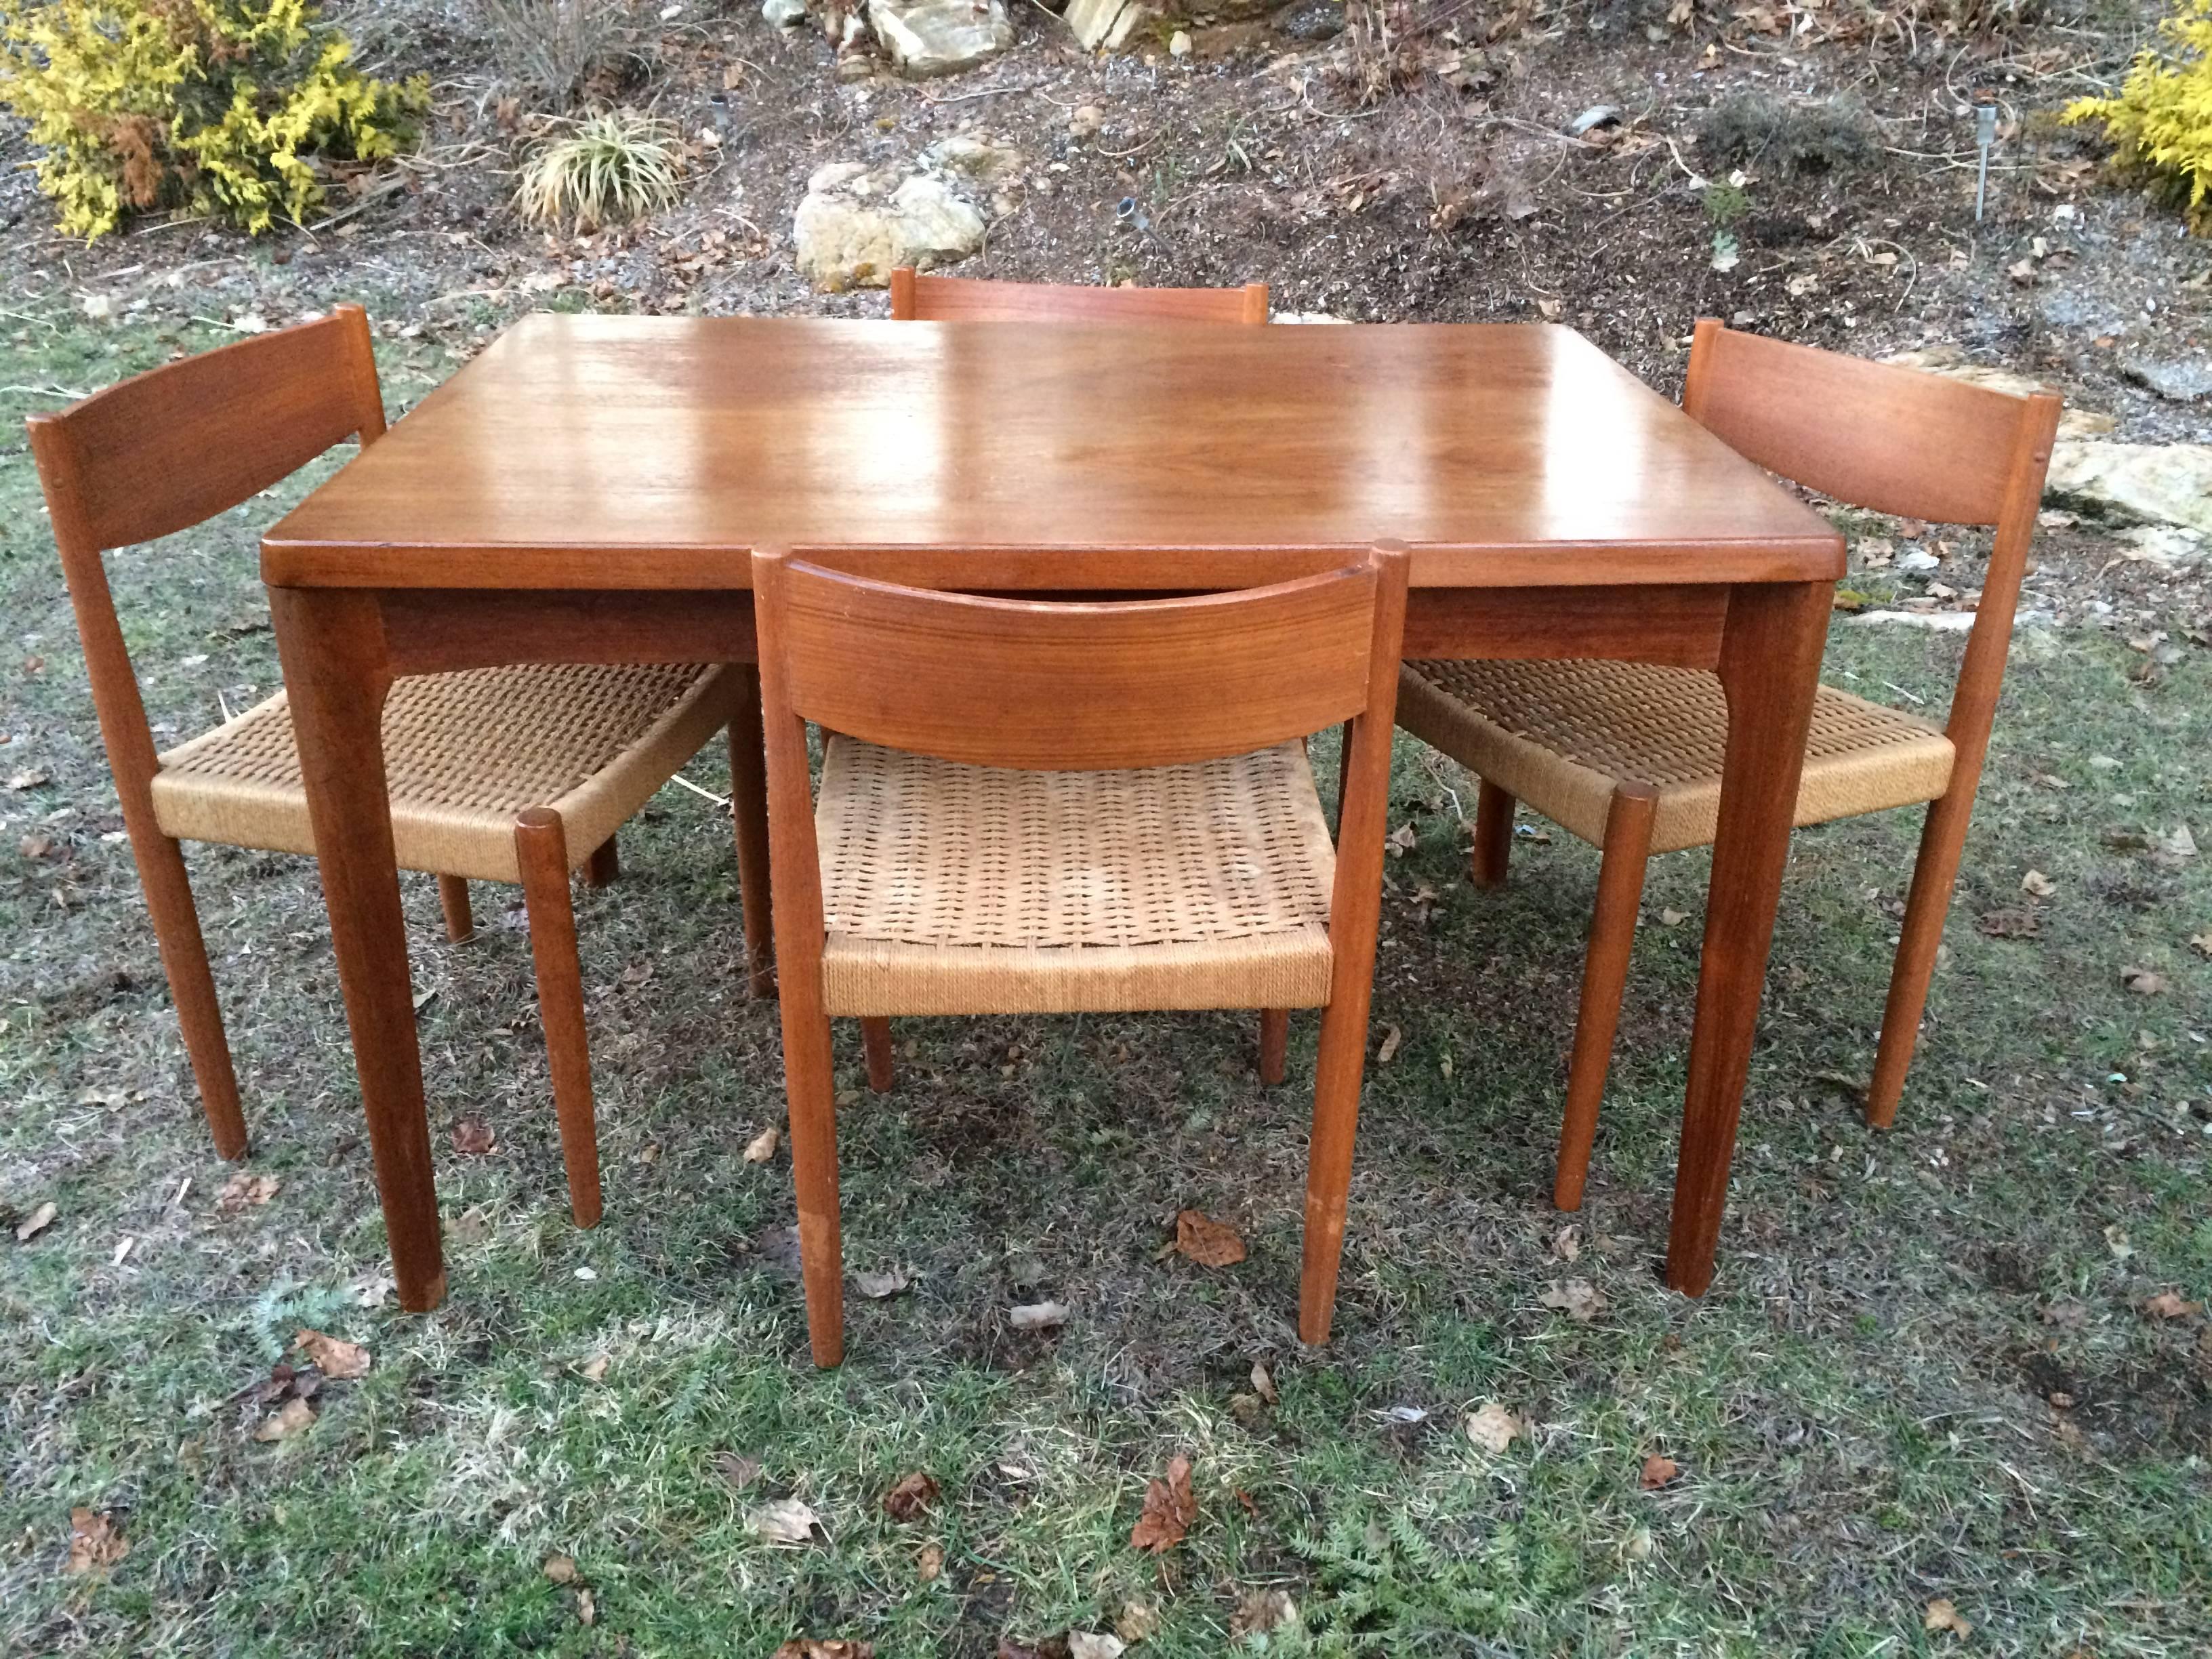 Danish Modern Extendable Teak Dining Table with Woven Chairs. Signed Stole Mobelfabrik. Made in Denmark. The table has been refinished since these photos were taken. The table measures 30 in.H x 84 in. W x 32 in.D when fully extended. Un-extended